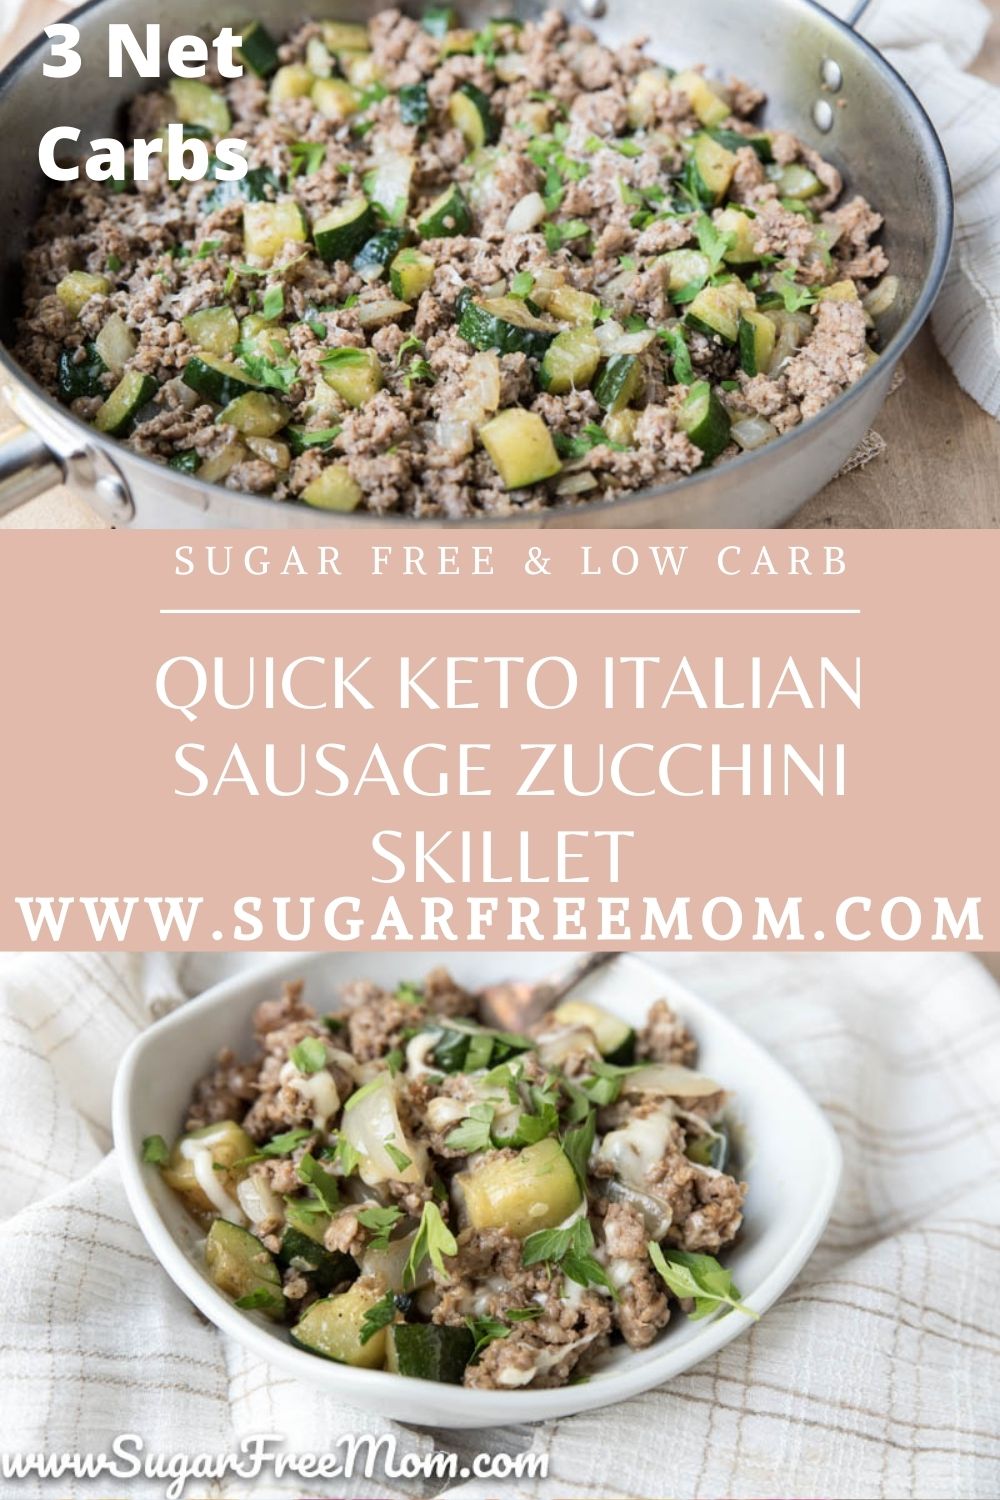 Quick Keto Italian Sausage Zucchini Skillet (One Pan Meal)